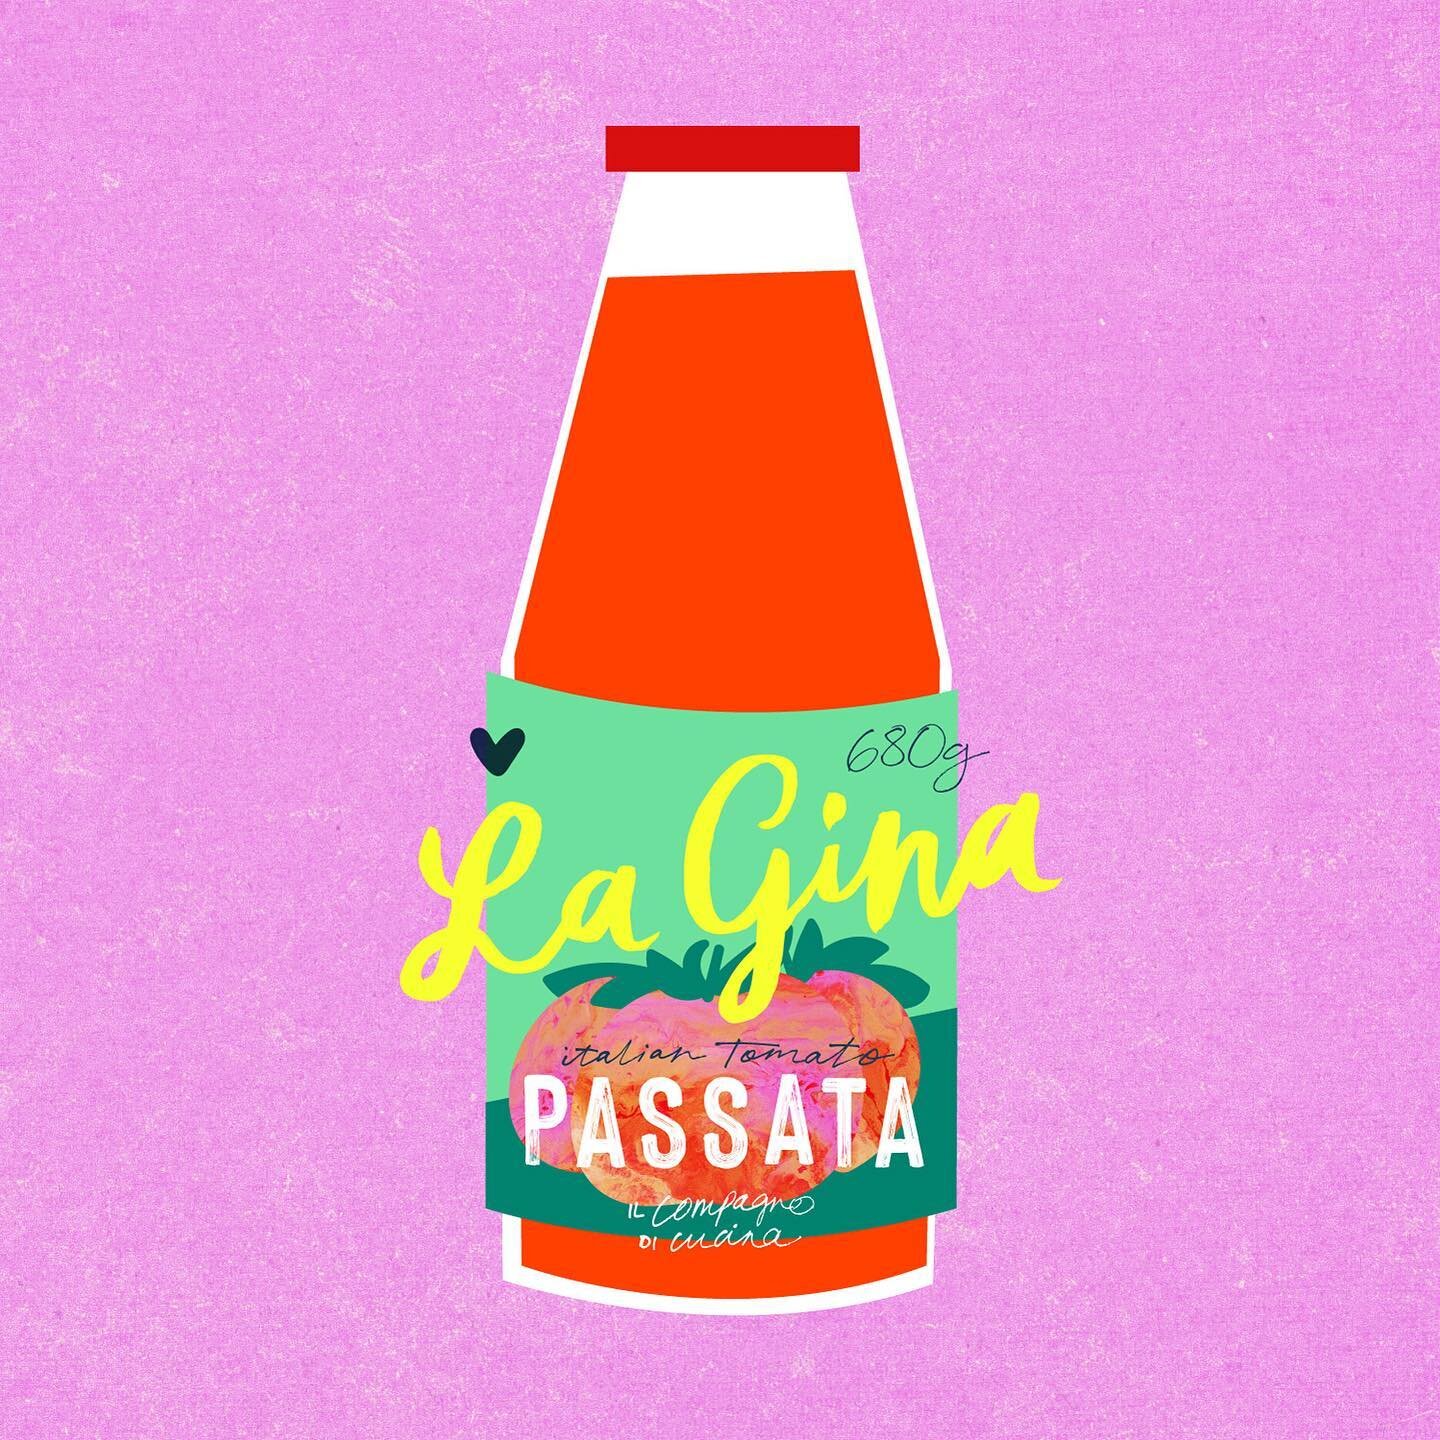 ⠀⠀⠀⠀⠀⠀⠀⠀⠀
Business podcasts I listen to: 
So you should be posting at such and such time, having a consistent feed and sharing knowledge via your Instagram posts 
⠀⠀⠀⠀⠀⠀⠀⠀⠀
Me: here&rsquo;s a REALLY bright drawing of a bottle of tomato passata